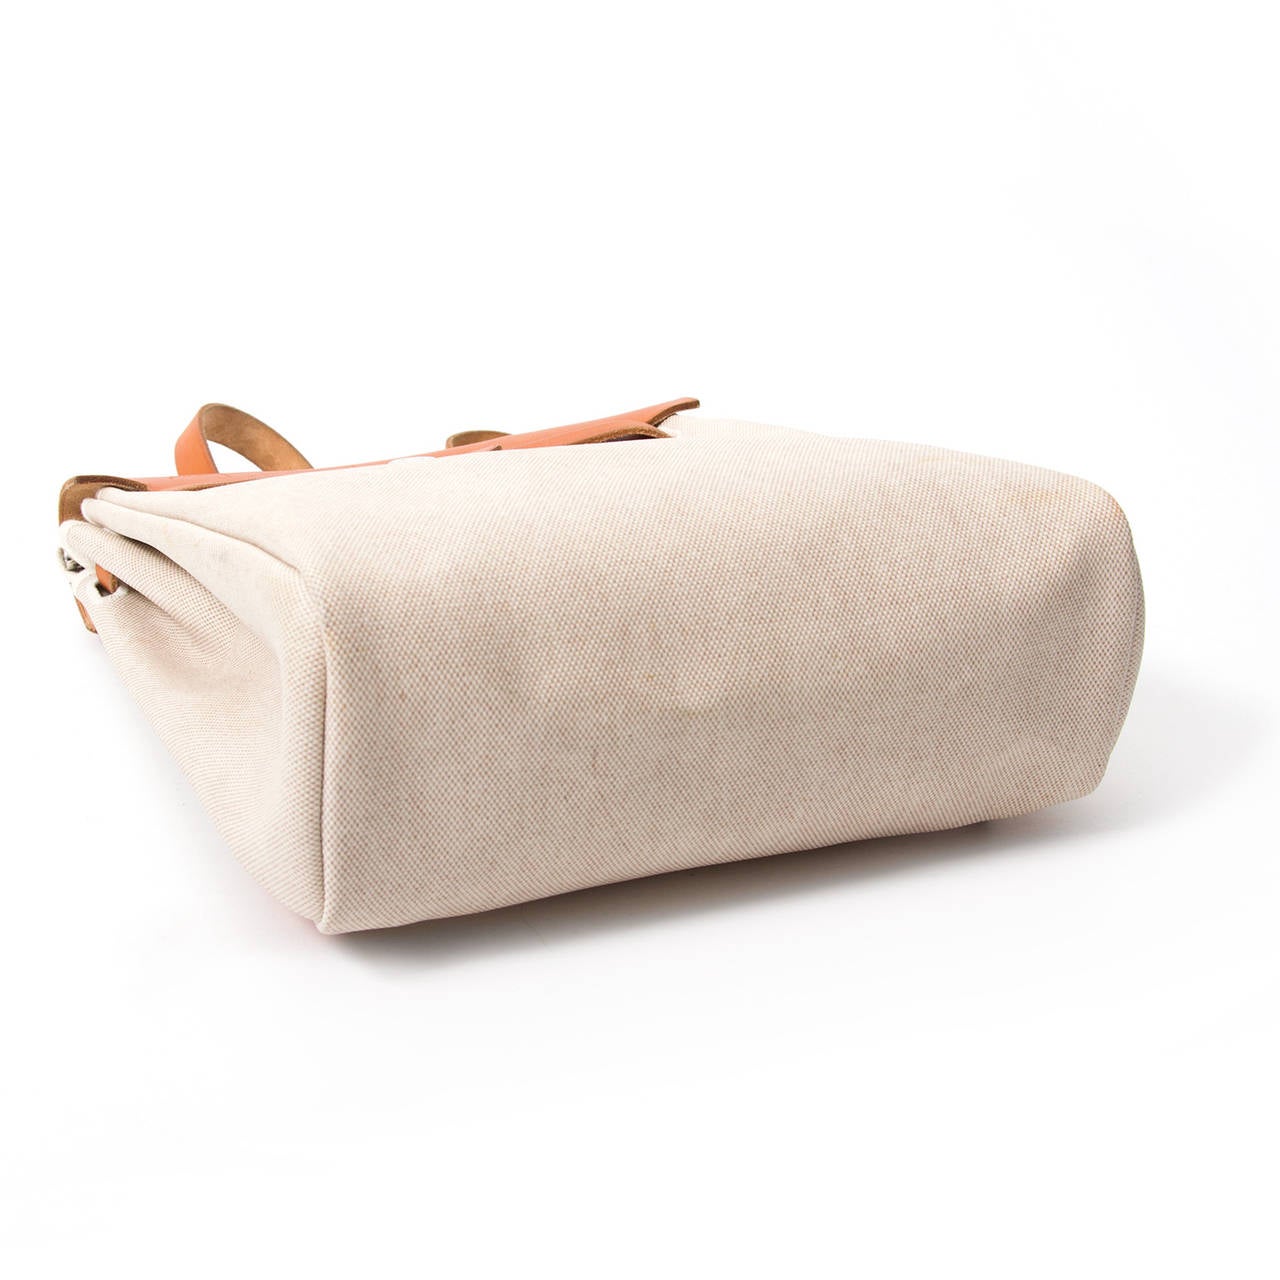 This Hermès Herbag comes in woven white and beige canvas with cognac leather detailing.
It has a noticeable trapezoid shape and a front flap similar to the Kelly bag, but with a different closure. Thanks to the leather straps, you can wear this